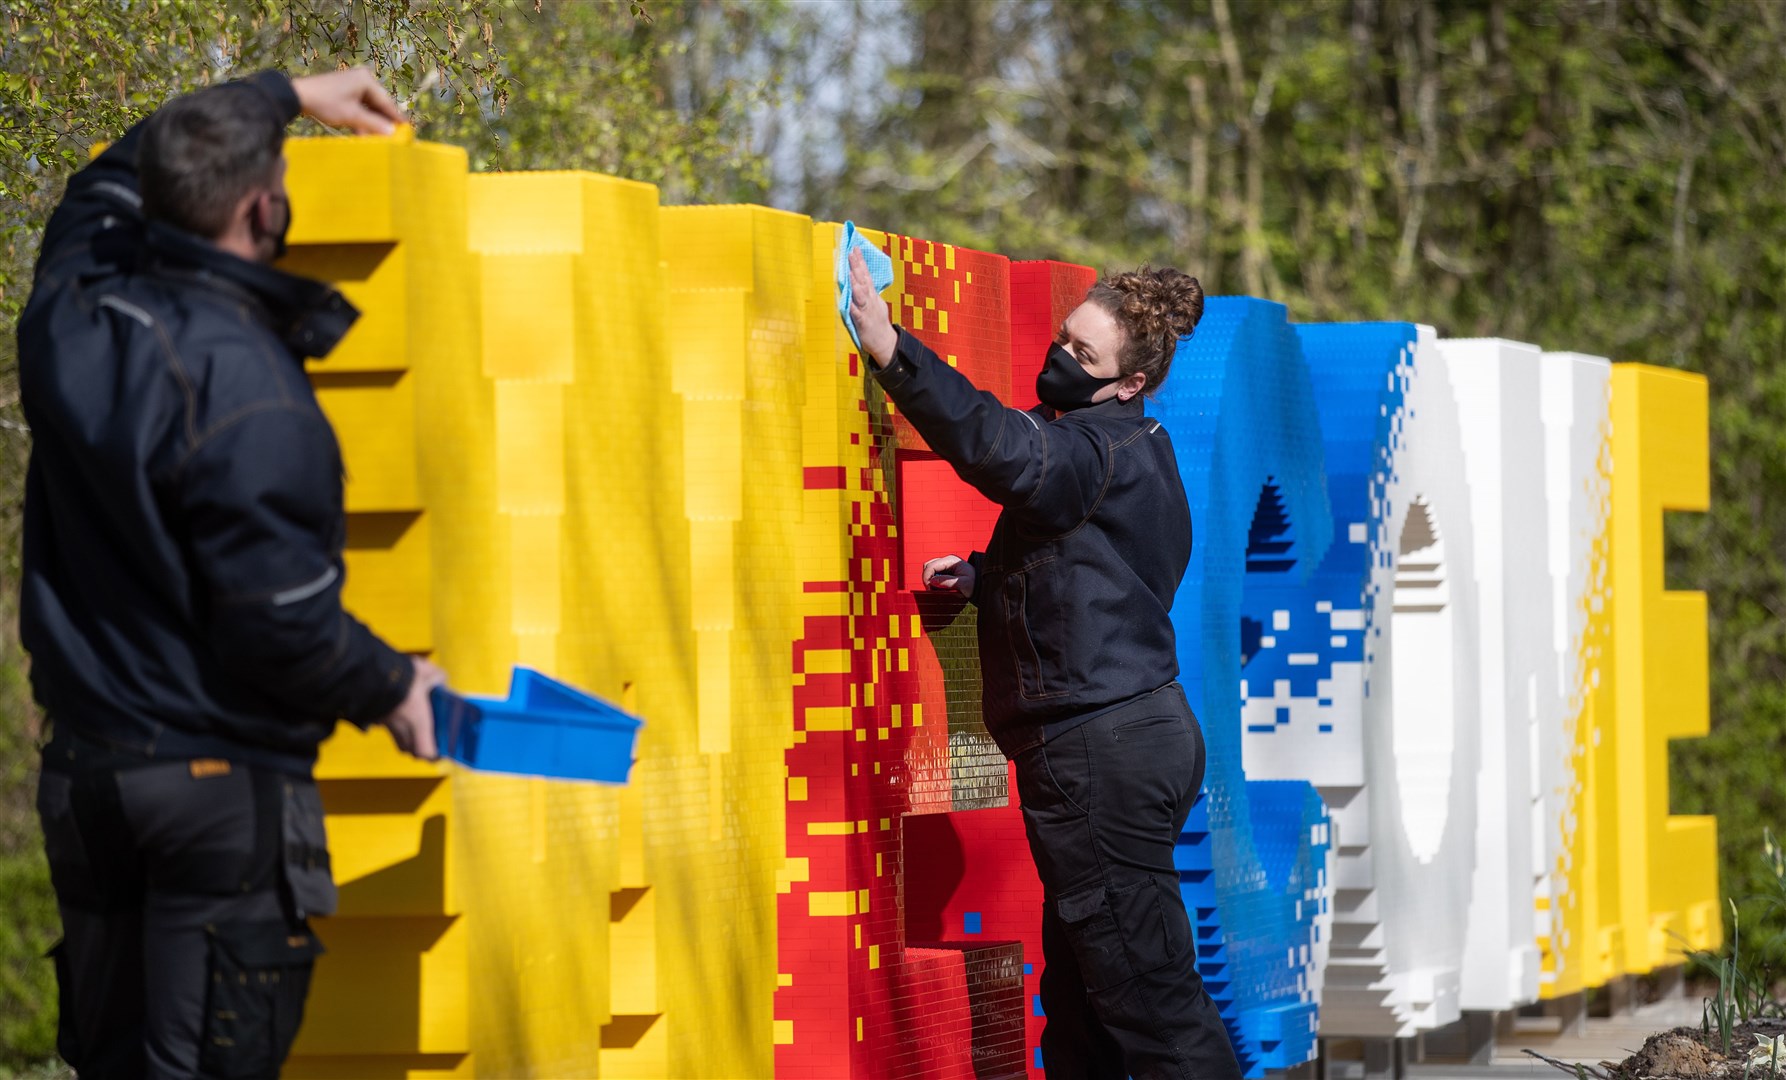 Legoland model makers Nicola Parker (right) and Elliott Ayton-Smith clean and add bricks to a welcome sign at the Legoland Windsor Resort, as they prepare to welcome back visitors (Andrew Matthews/PA)